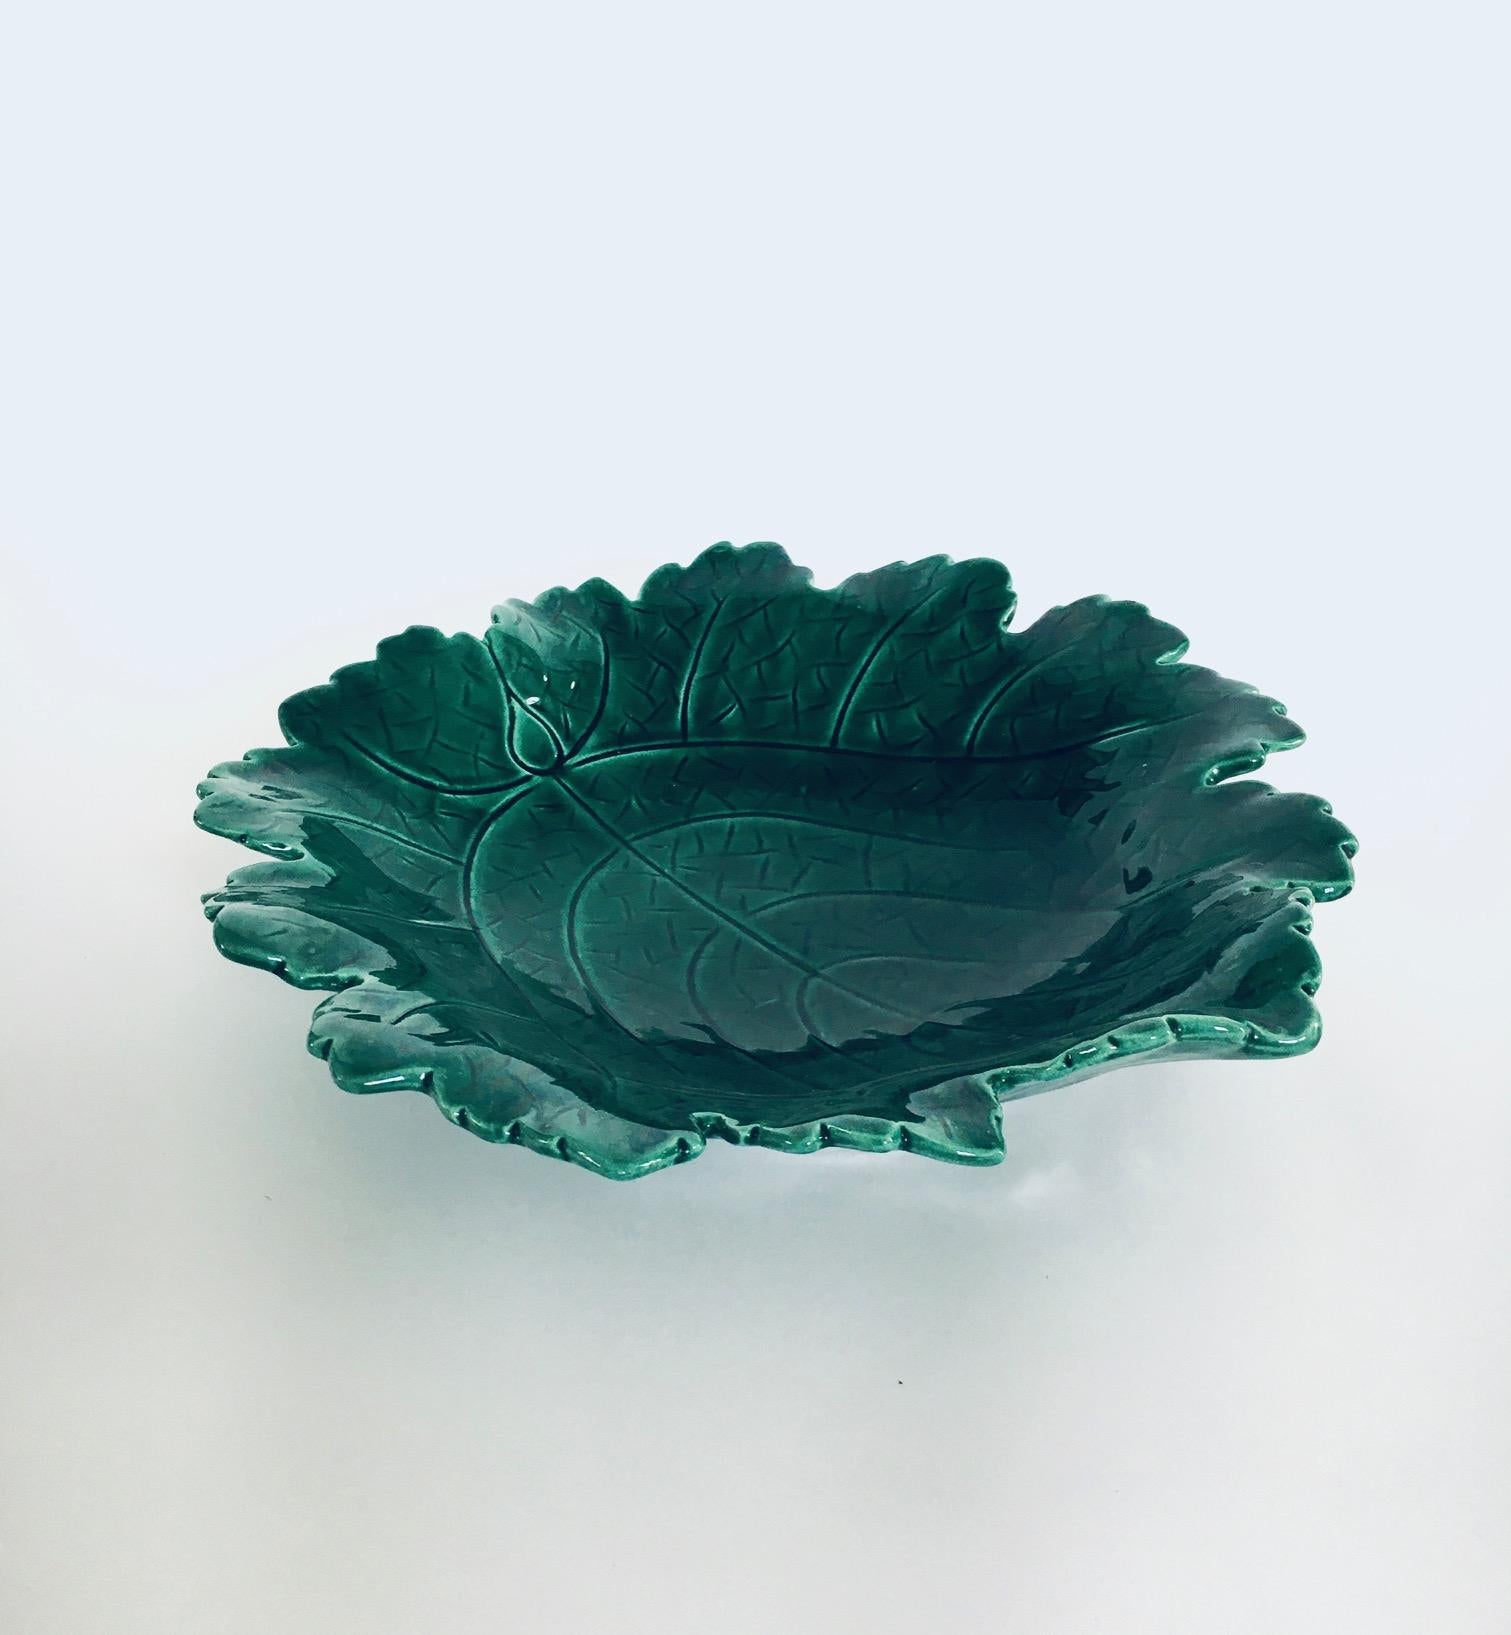 Vintage Midcentury Period Art Studio Pottery Large Leaf Bowl by Albert Ferlay. Made in France, Vallauris, 1960's. Stamped on the bottom: Creation A. Ferlay Vallauris. Forest green glazed bowl in the shape of a leaf. This comes in very good